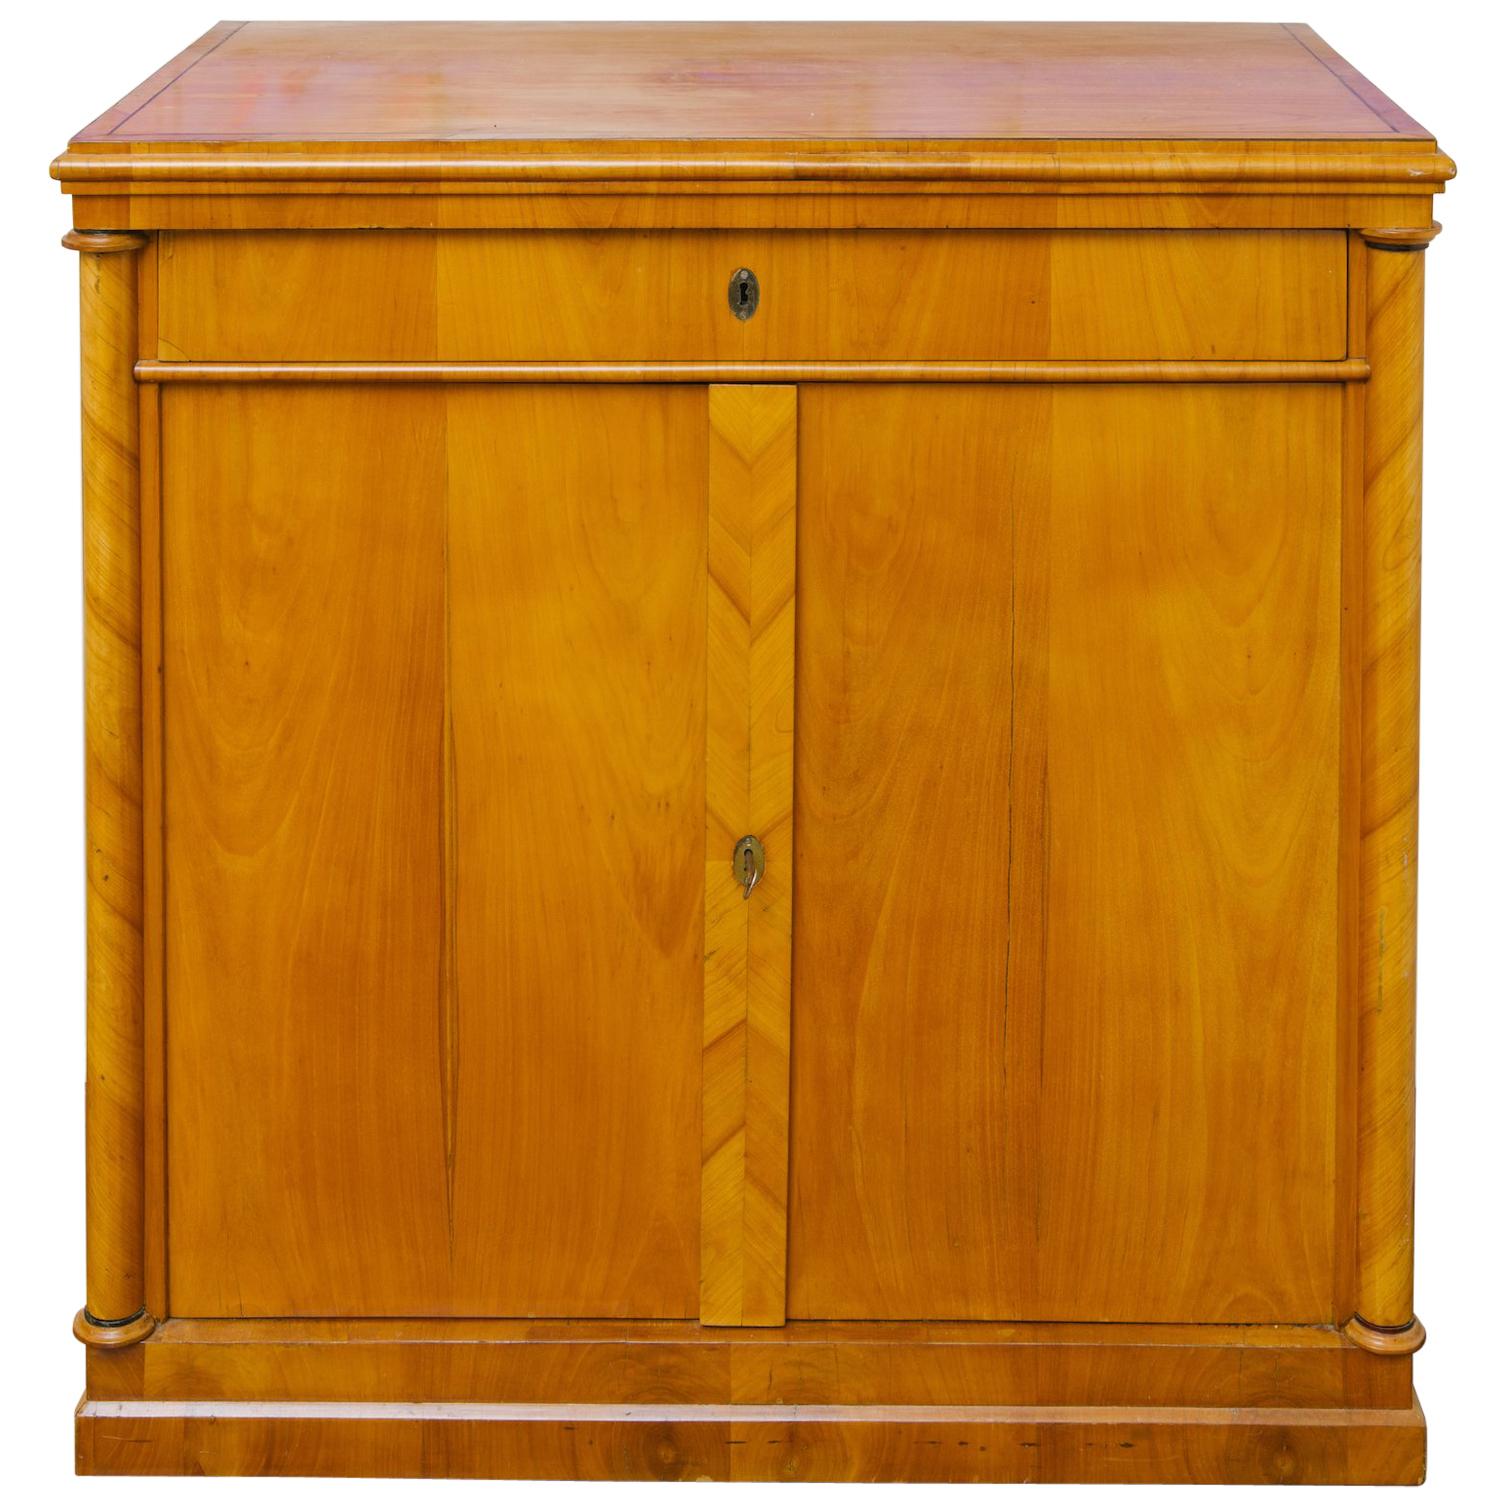 Pair of 19th century Biedermeier cabinets. There are three shelves for the two cabinets.